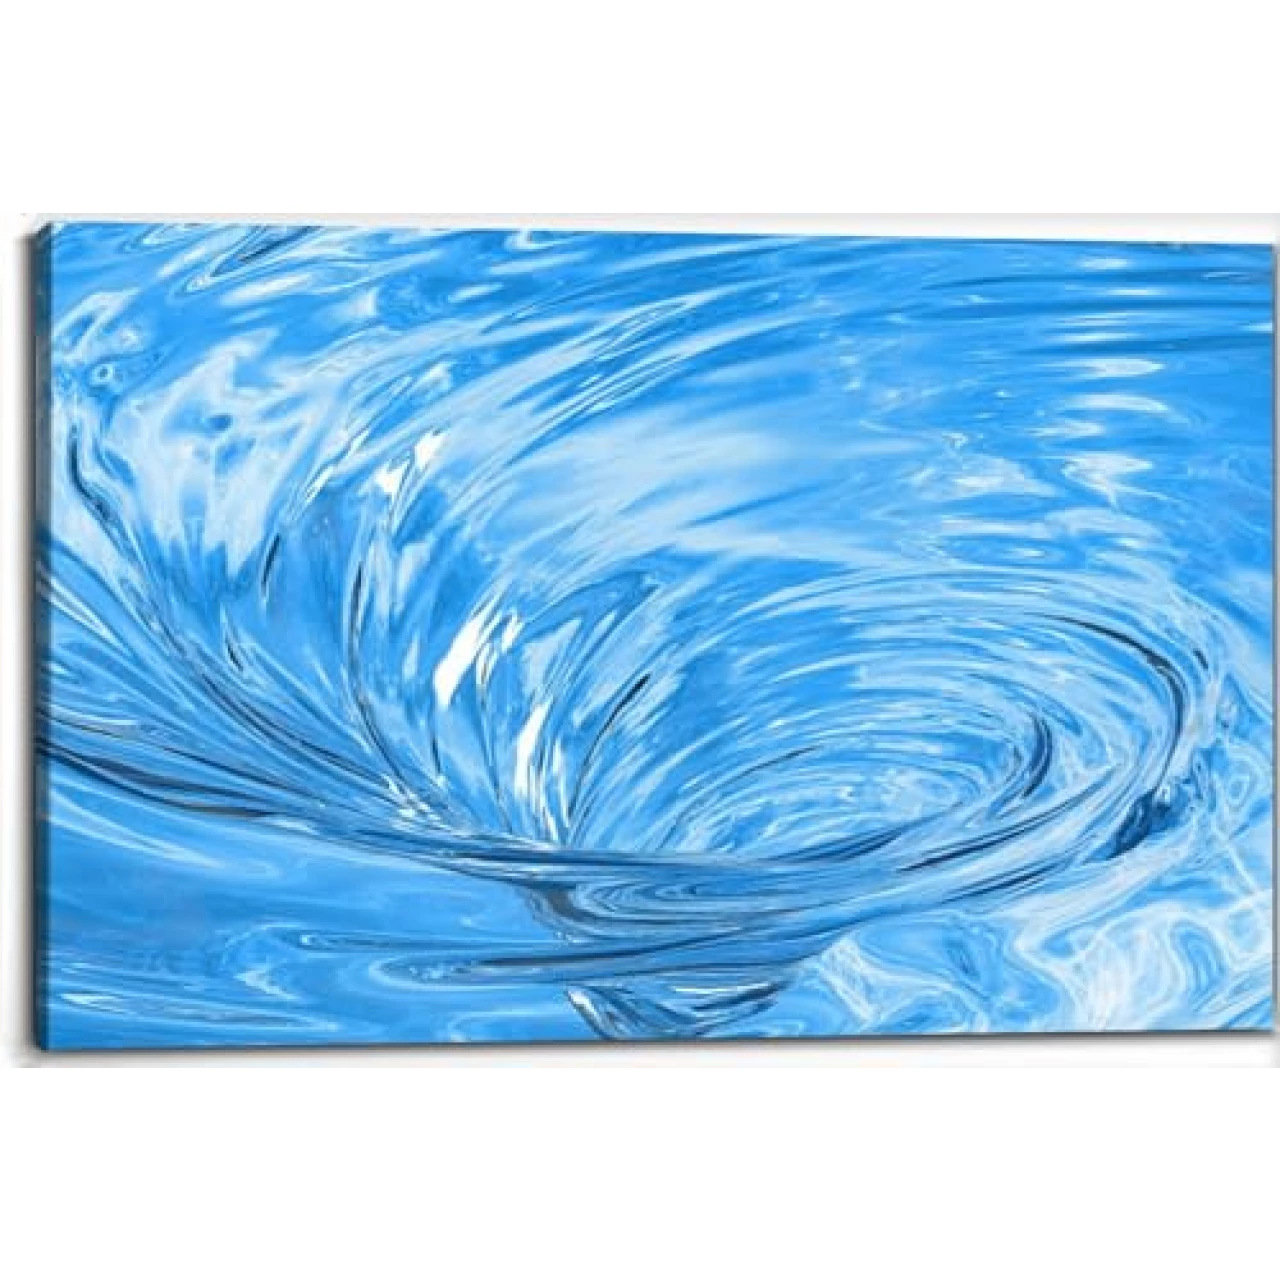 Water Vortex Whirlpool Tornado Sewer Canvas Wall Art Decor Paintings Pictures for Bedroom Wall Decor Above Bed Living Room Wall Decoration Bathroom Office Artwork